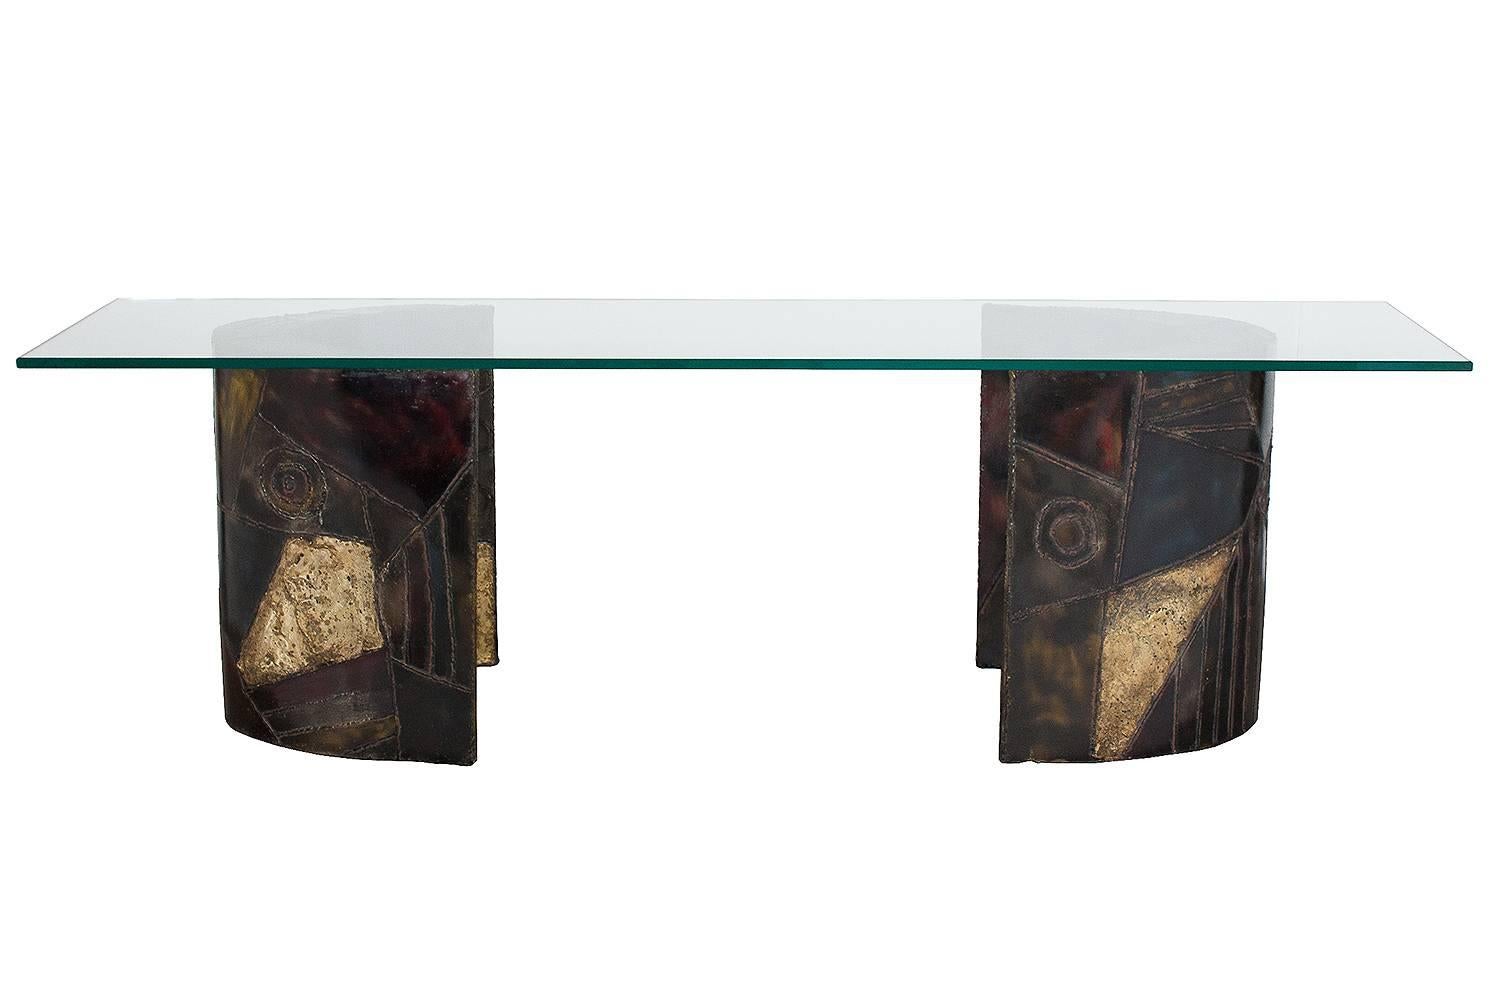 Paul Evans Studio PE-24 pedestal table for Directional. Two crescent shaped welded and enameled steel pedestal bases. Consider using as a dining table with a larger glass top. A 96